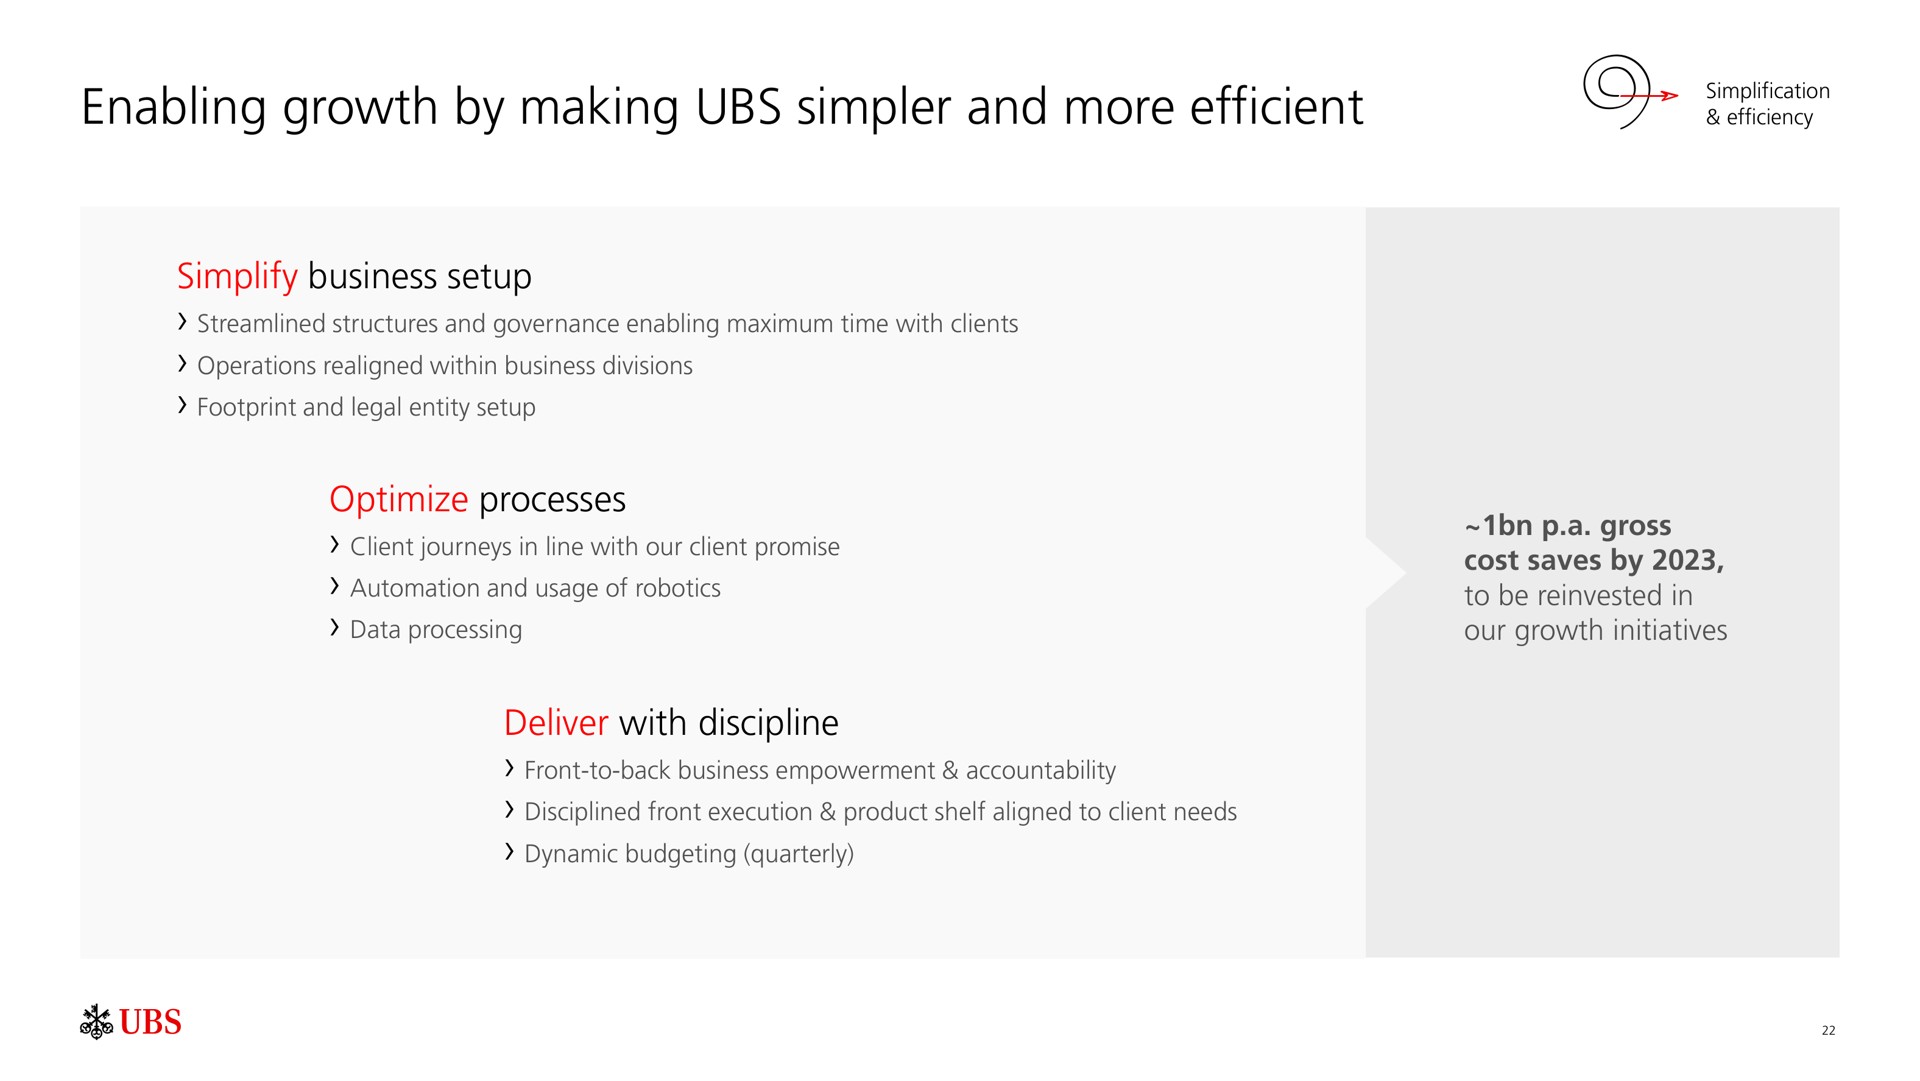 enabling growth by making simpler and more efficient | UBS